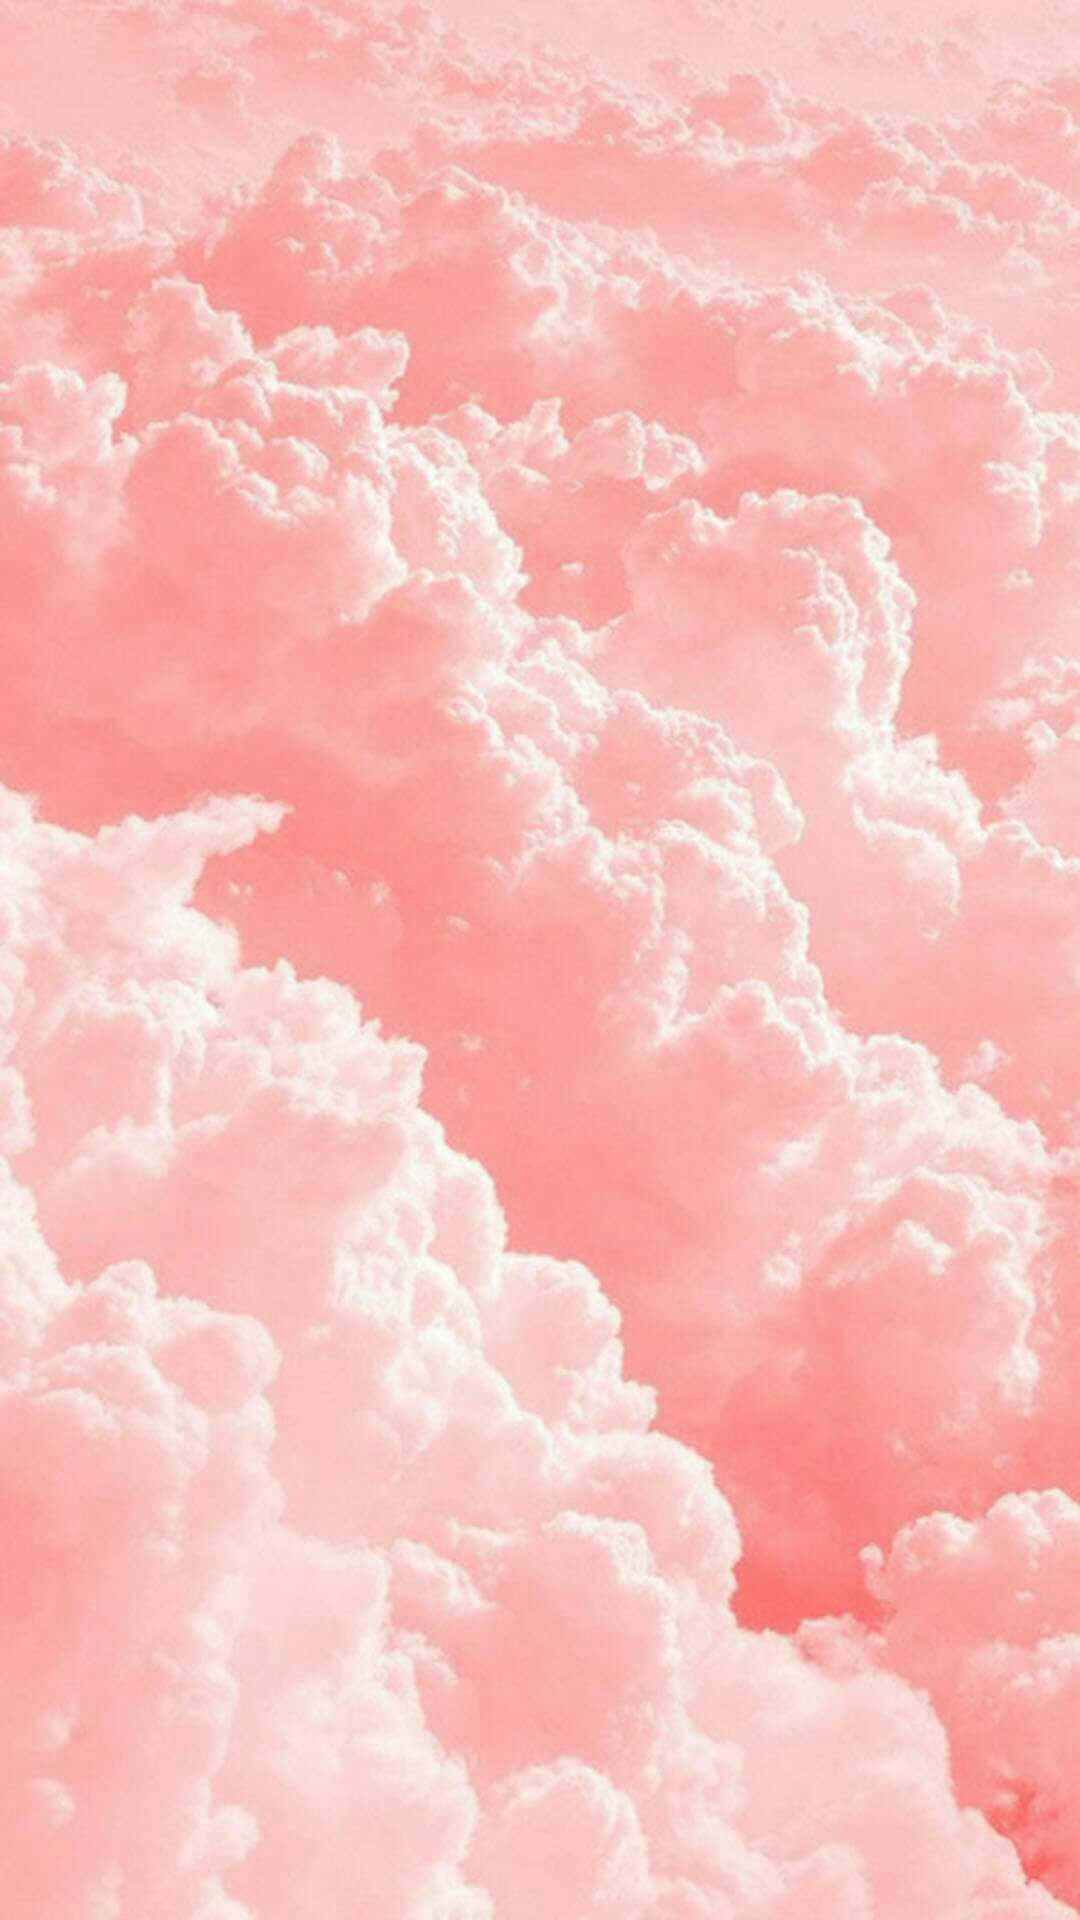 The Sweetest Treat - Deliciously Sweet Pink Cotton Candy Wallpaper